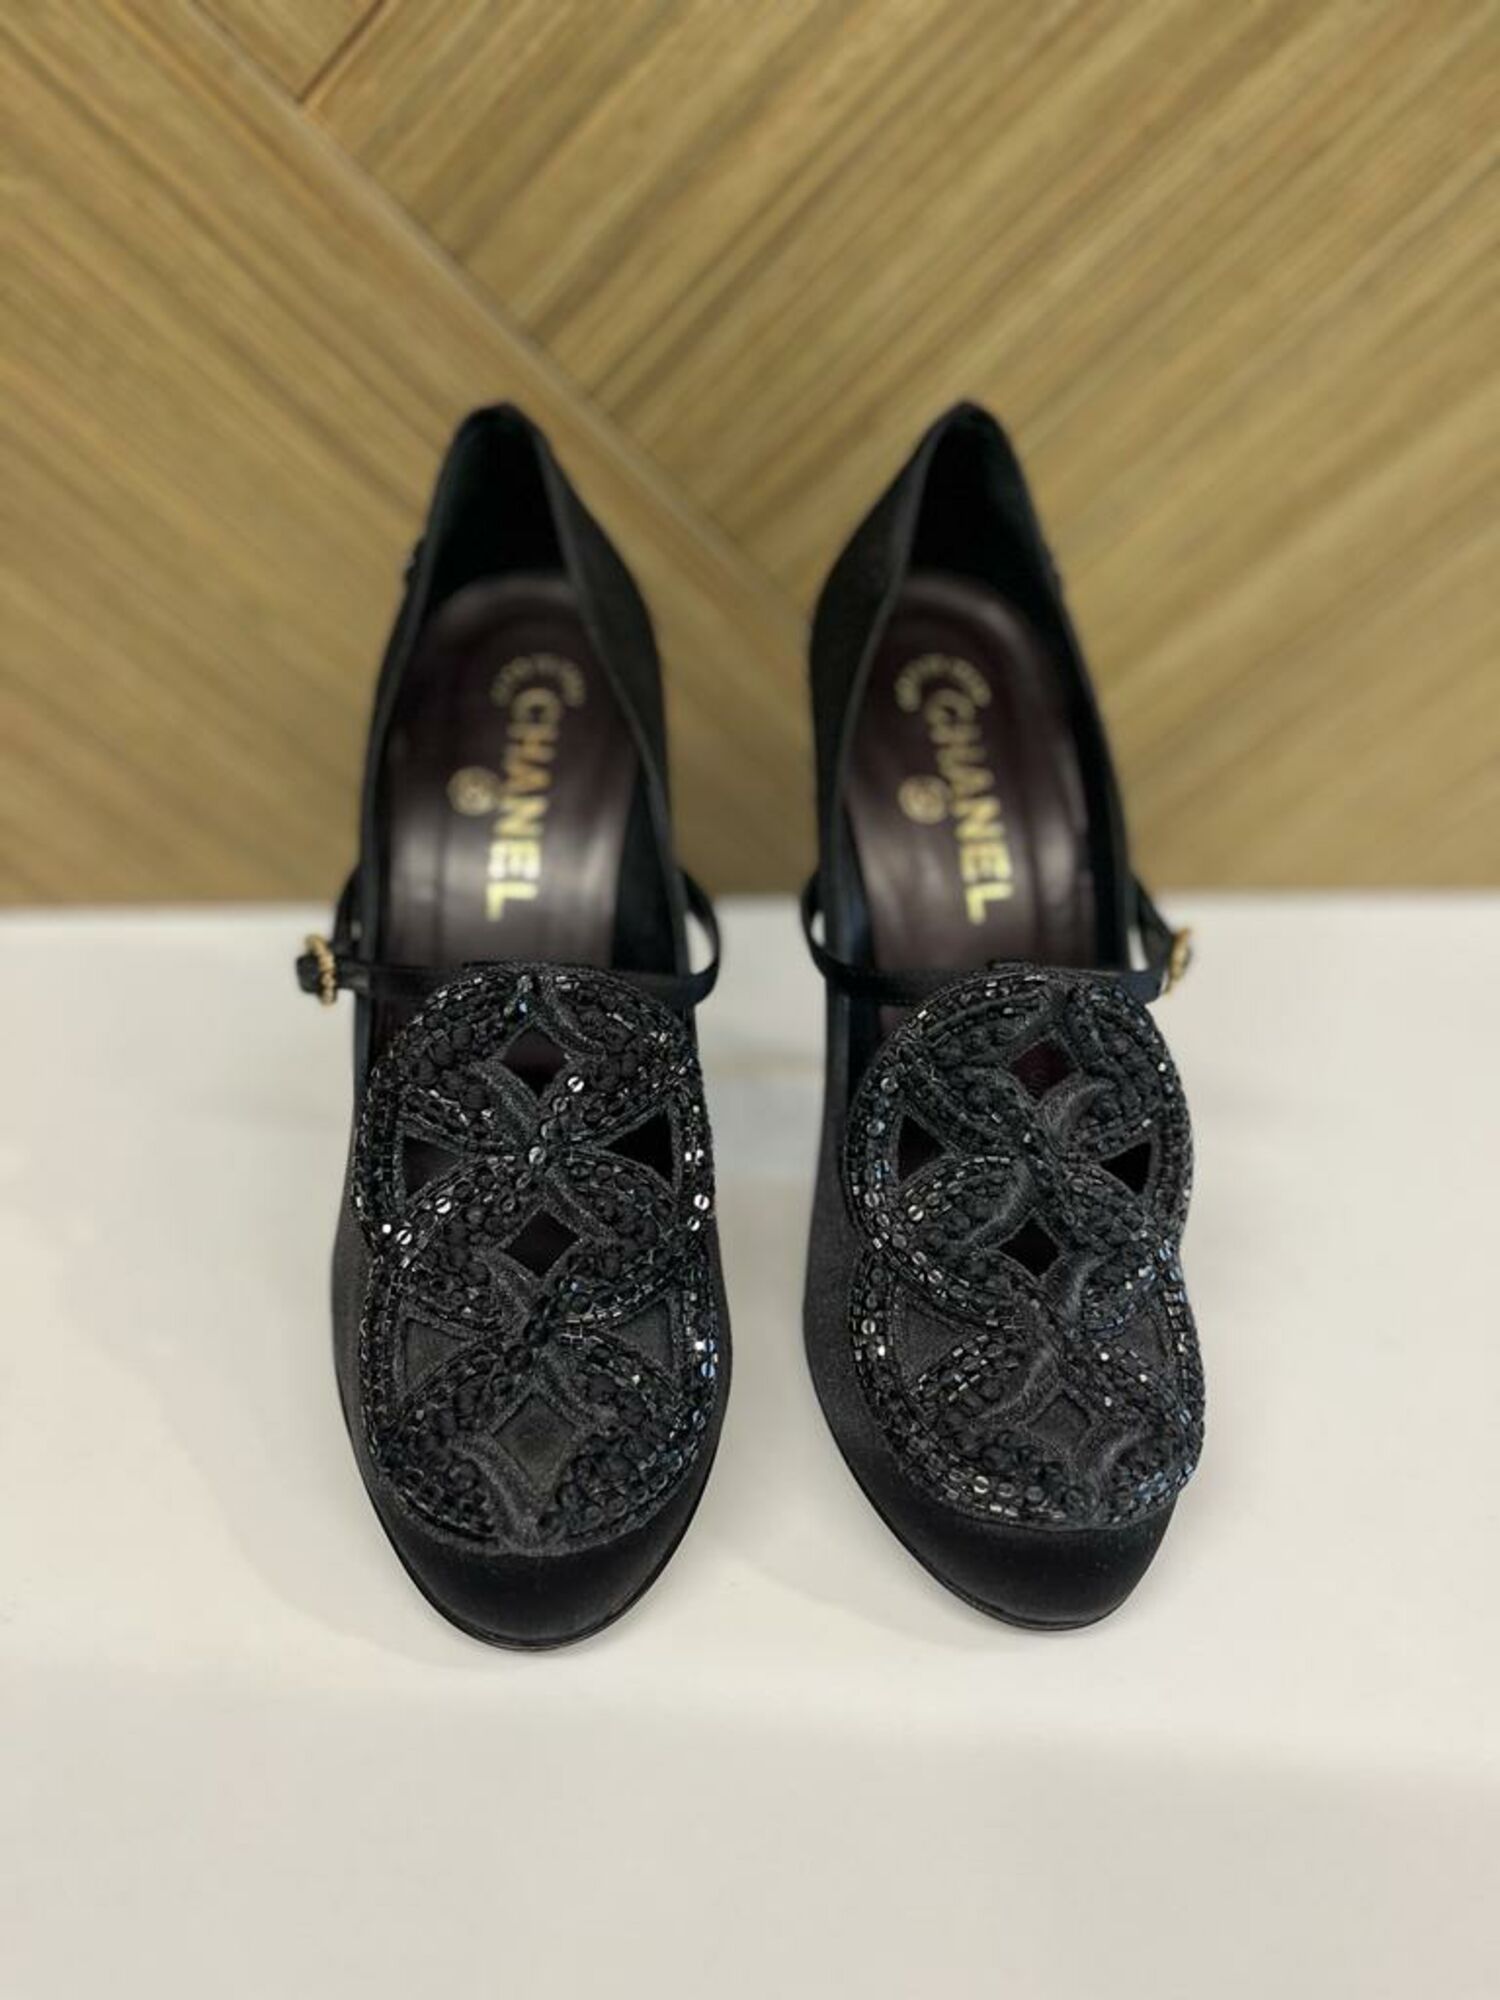 CHANEL Pre-Owned Women's Shoes in Pre-Owned